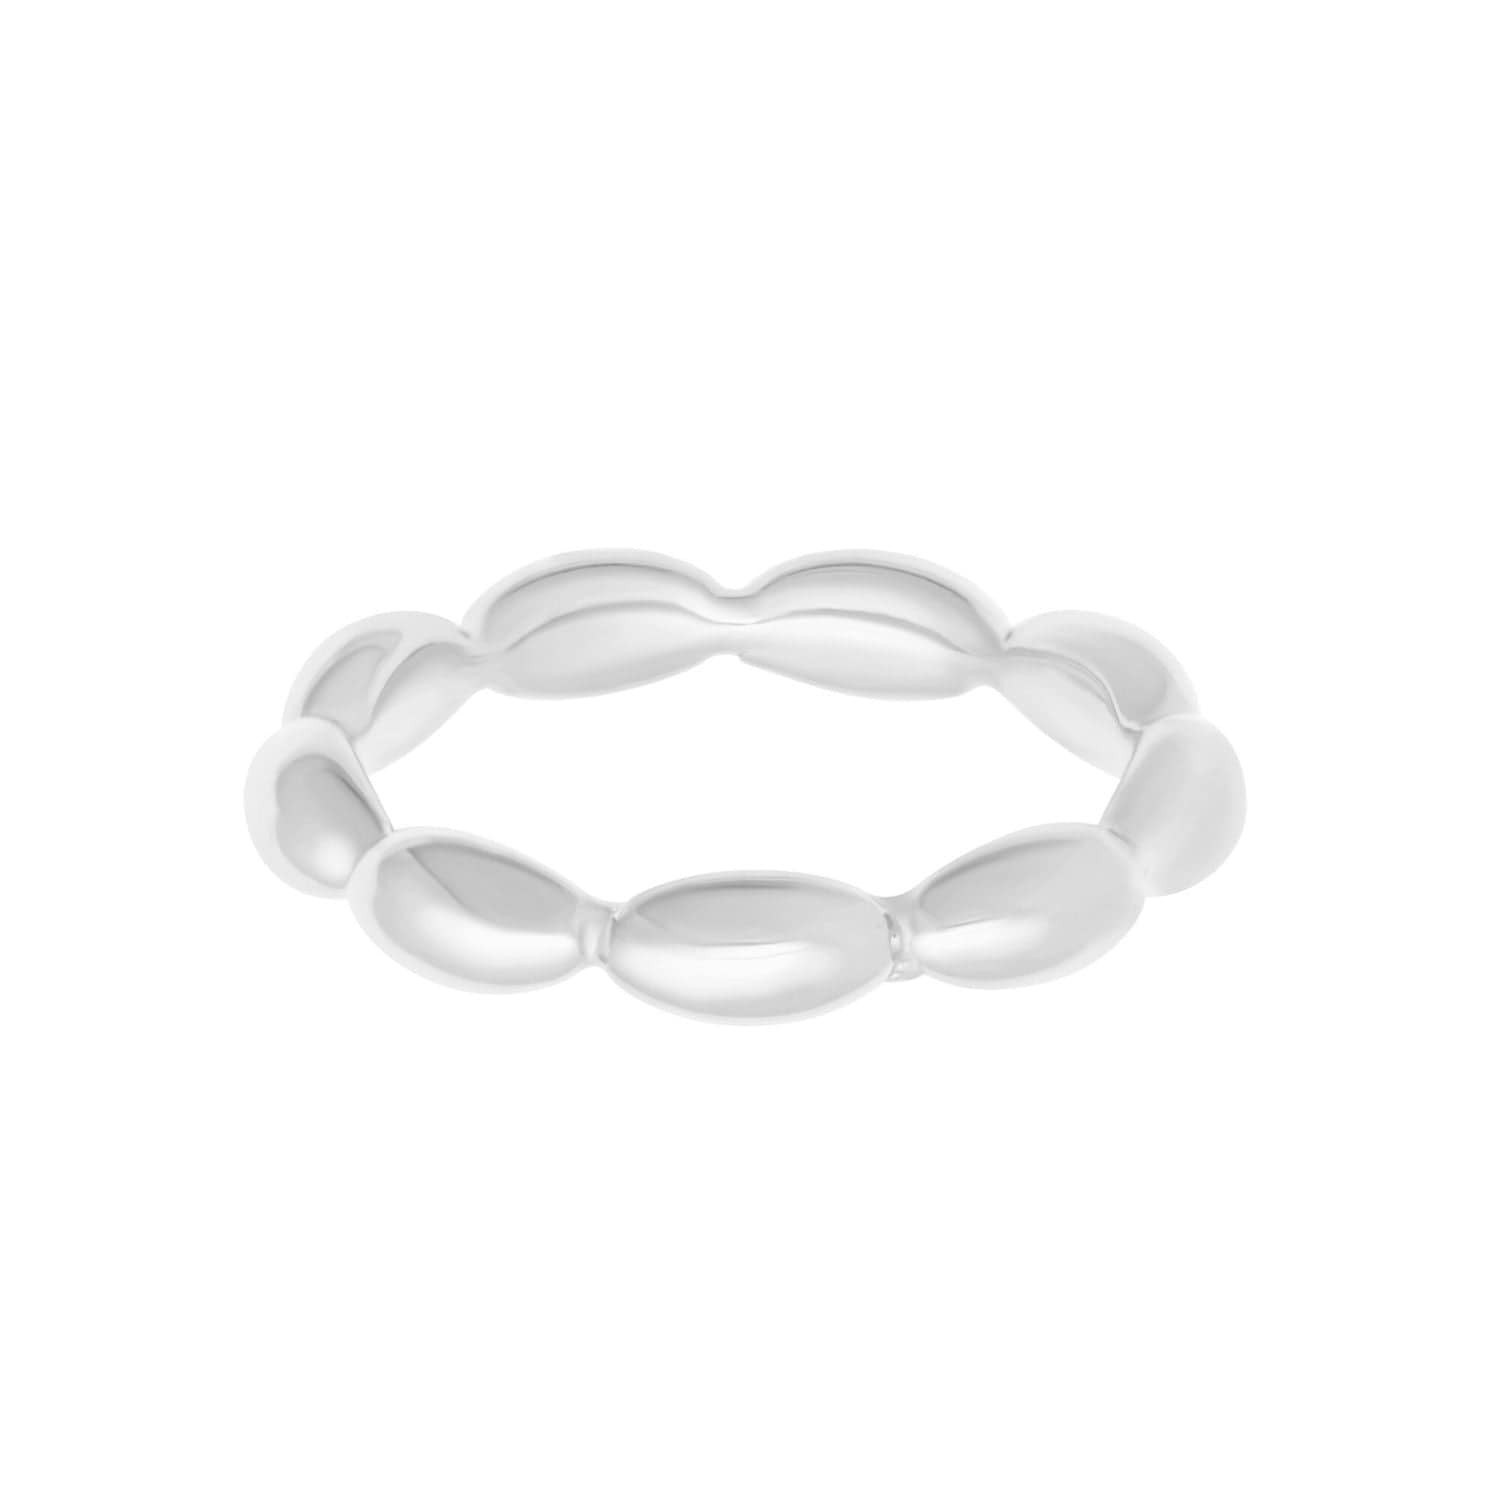 BohoMoon Stainless Steel Cara Ring Silver / US 6 / UK L / EUR 51 (small)